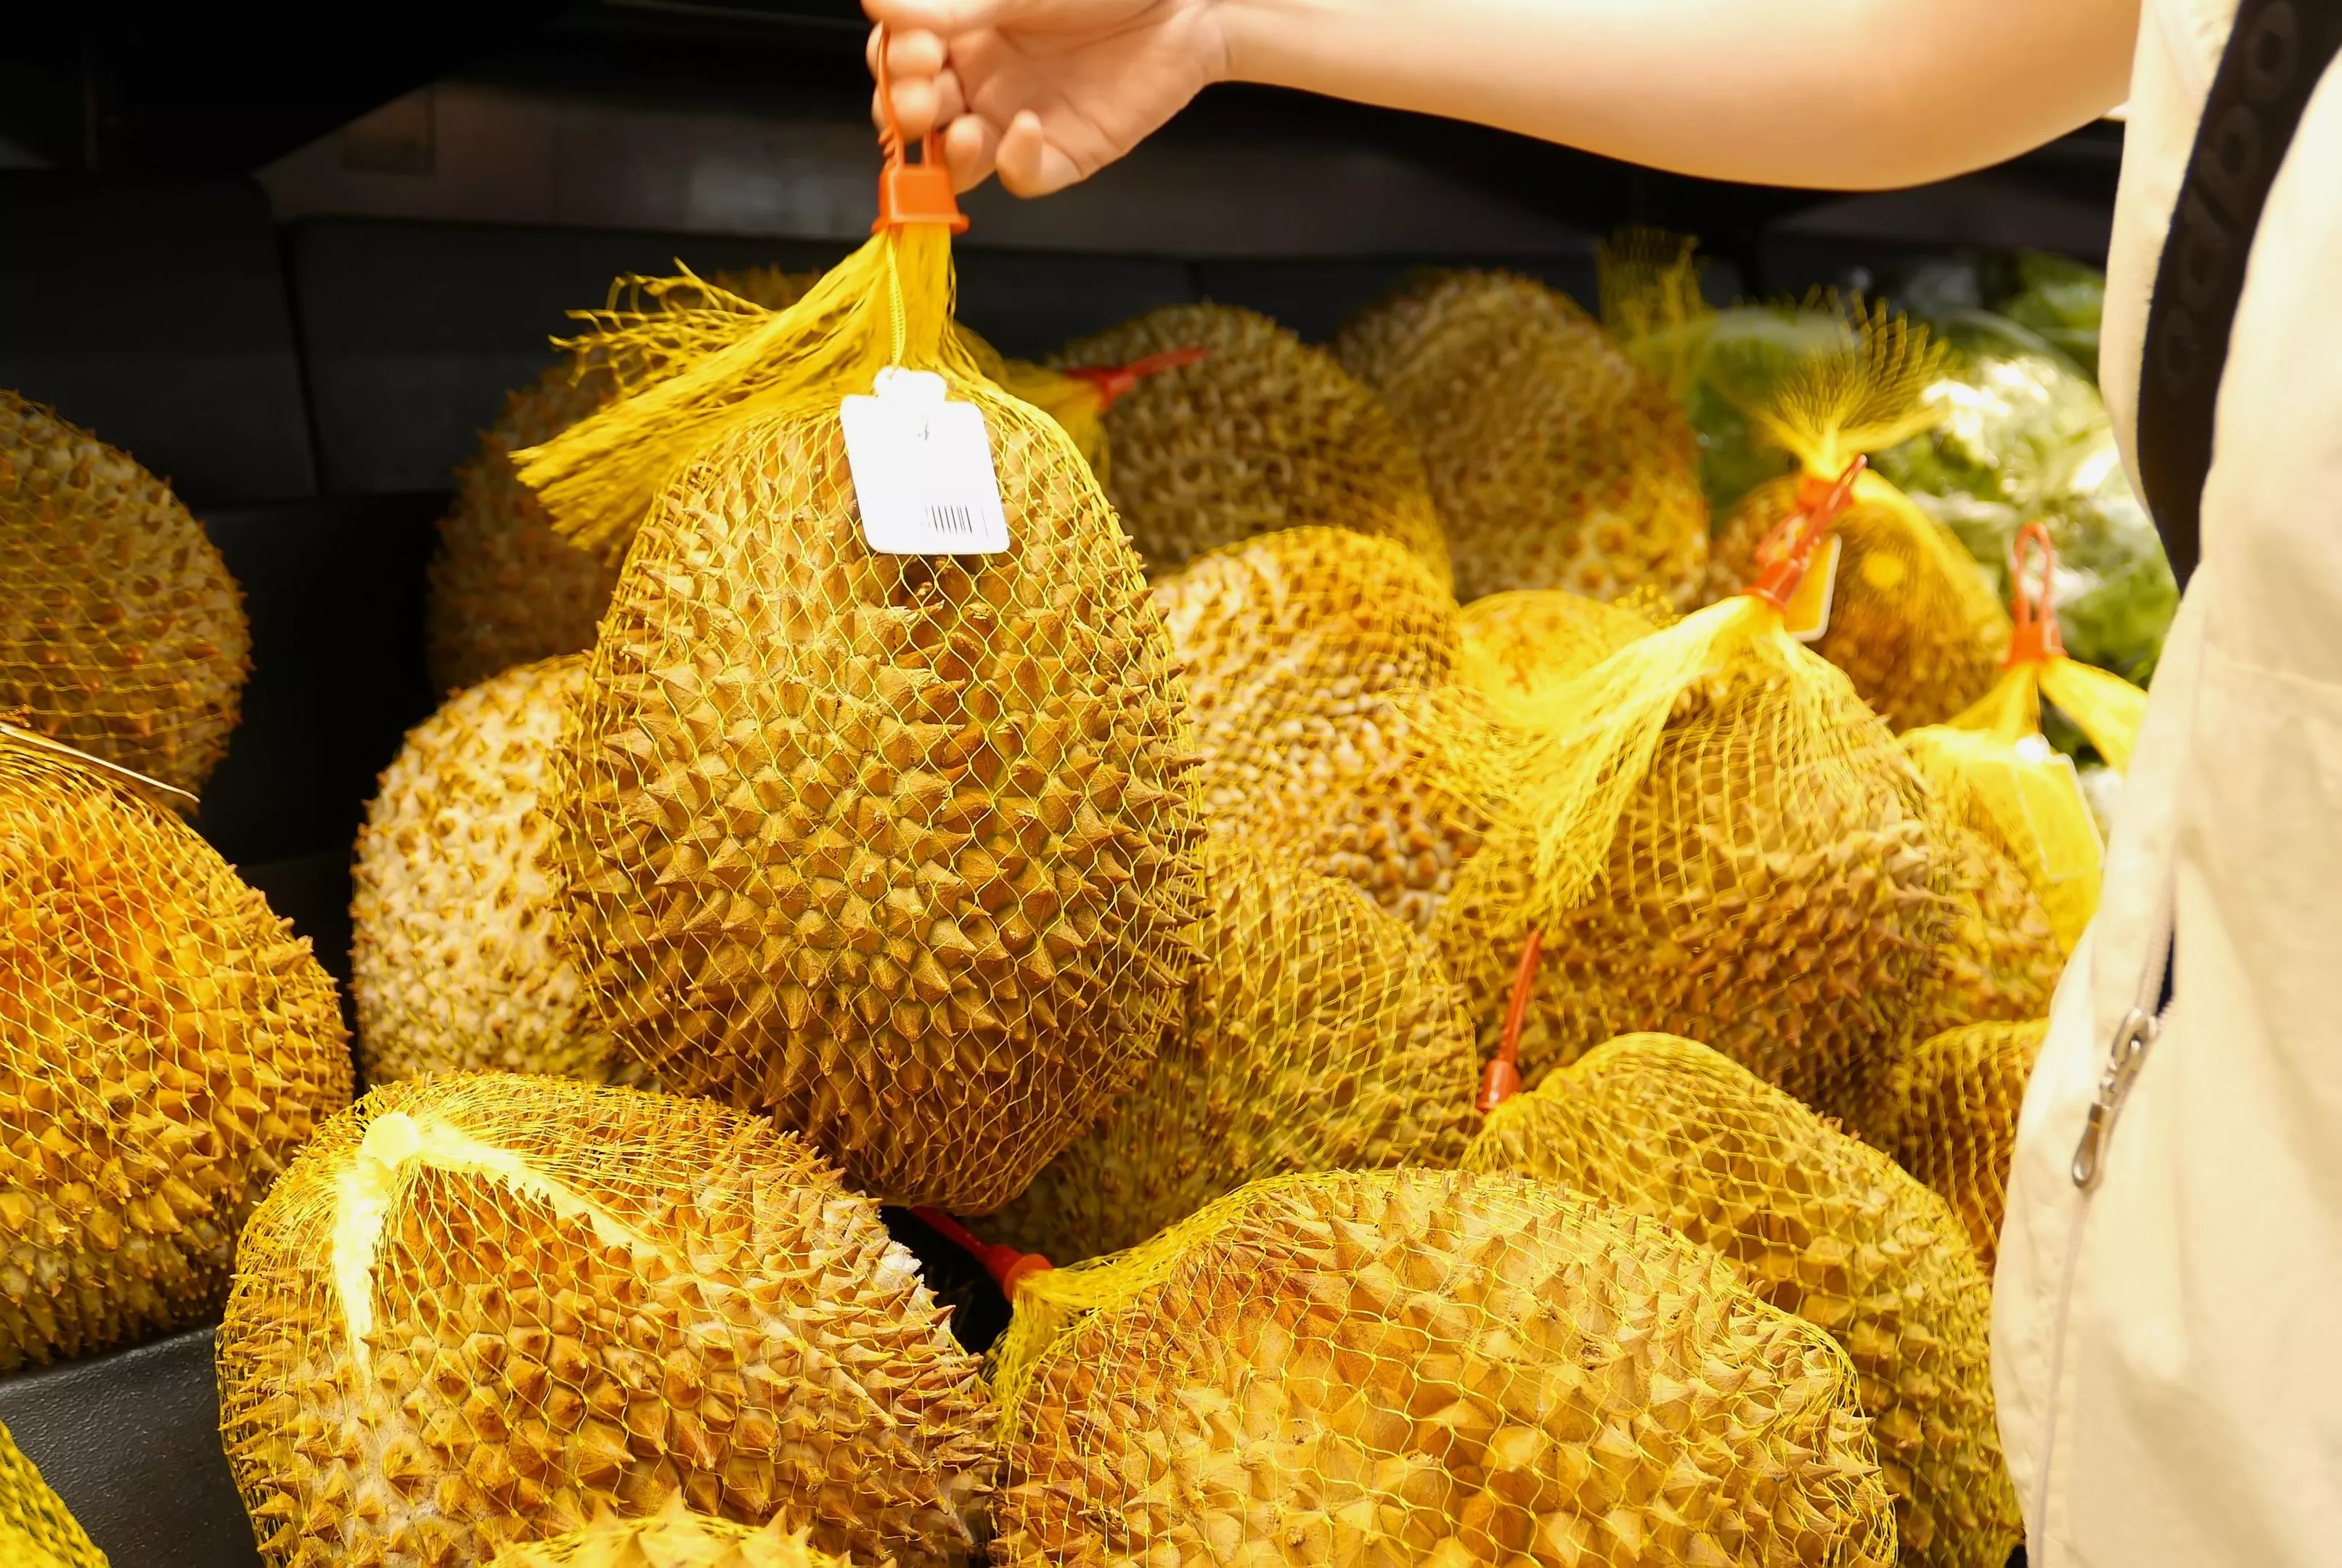 Durian Delivery Service: Enjoying Your First Taste of Durian